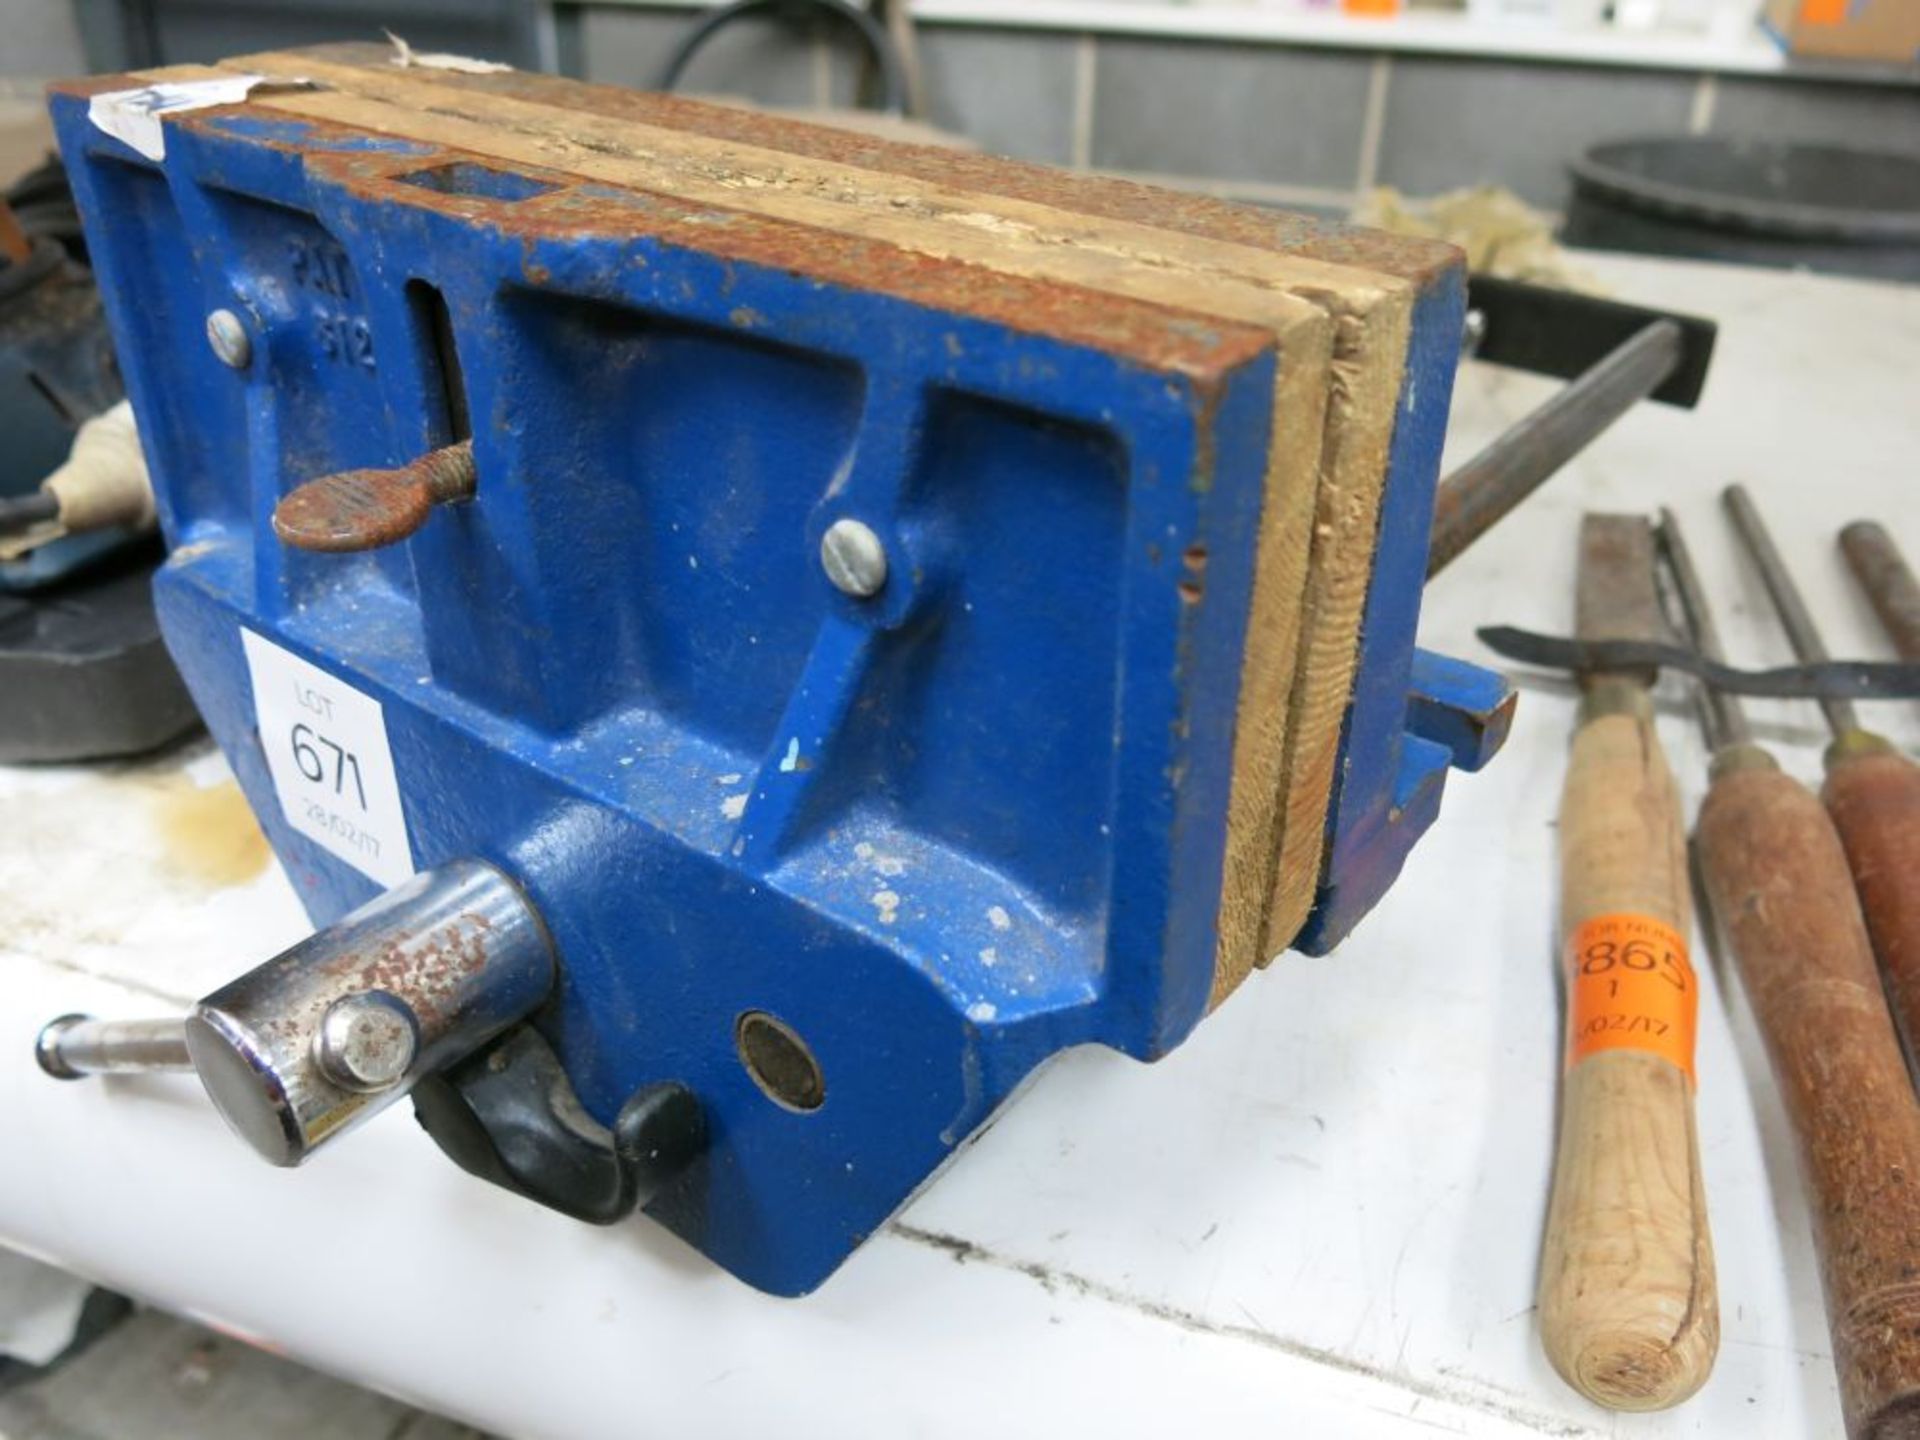 A bench vice